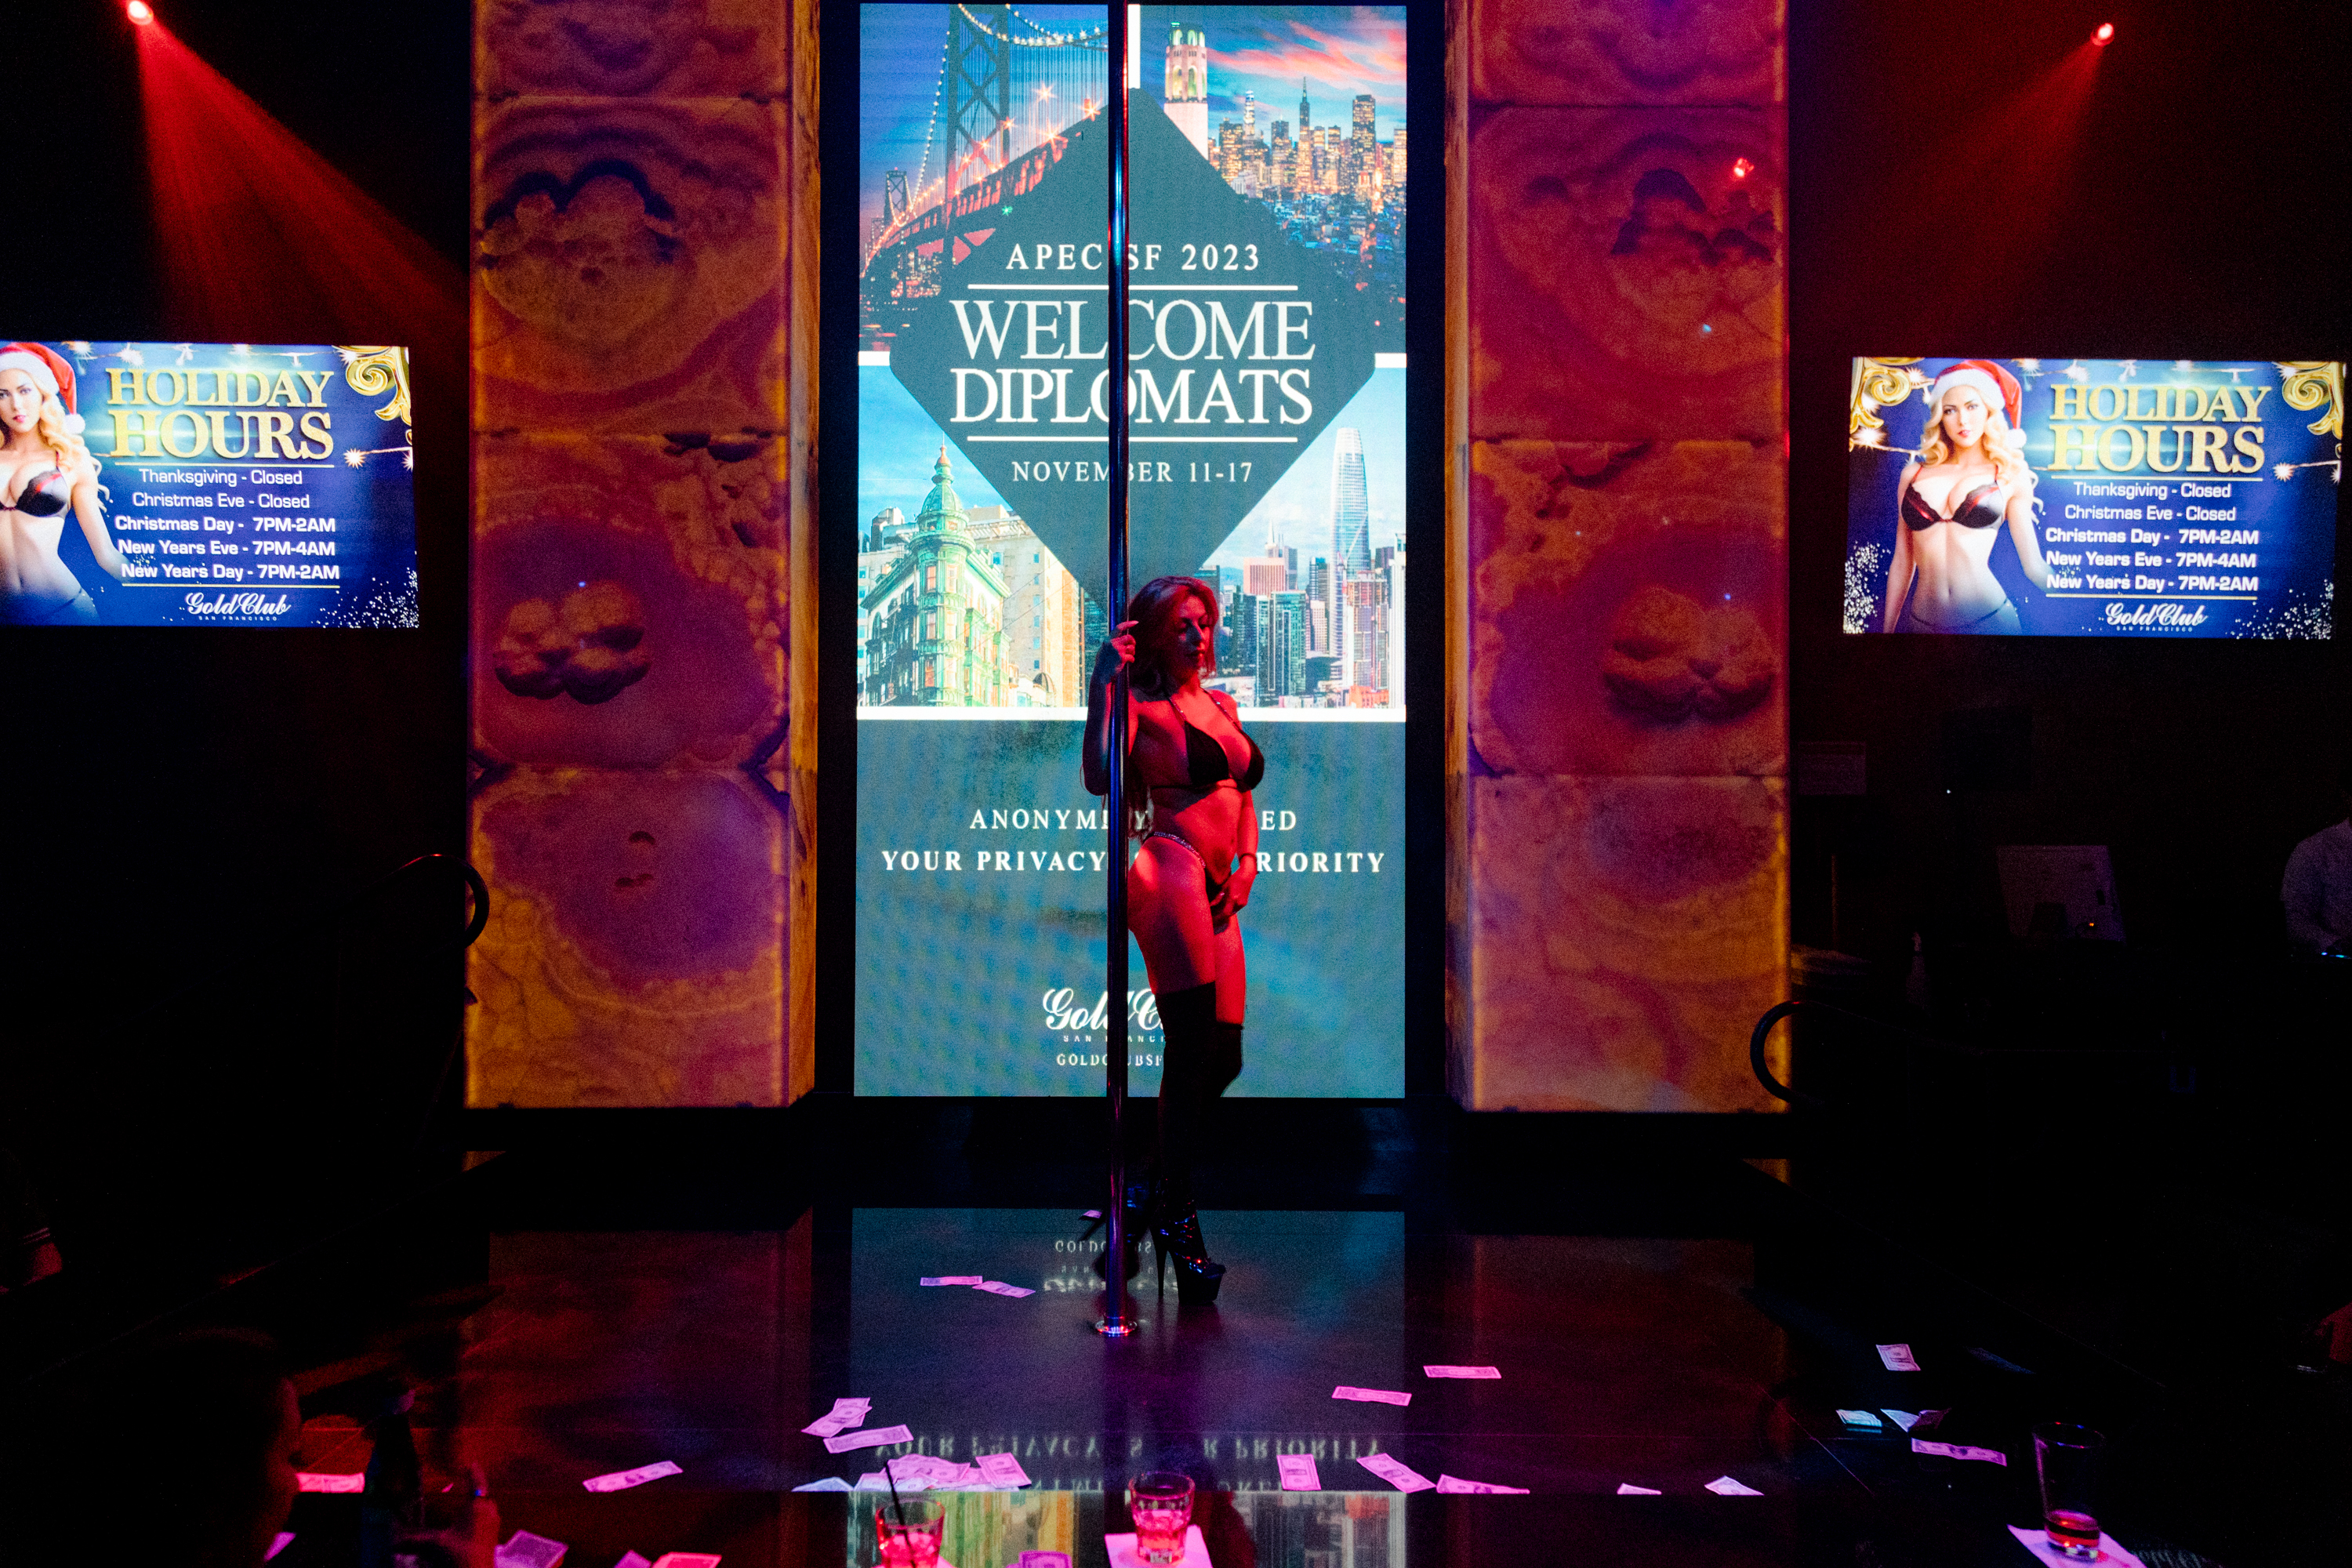 An exotic dancers stands in the middle of the dance floor with dollar bills on the ground and a LCD screen that reads "Welcome Diplomats - APEC SF 2023 - November 11-17"